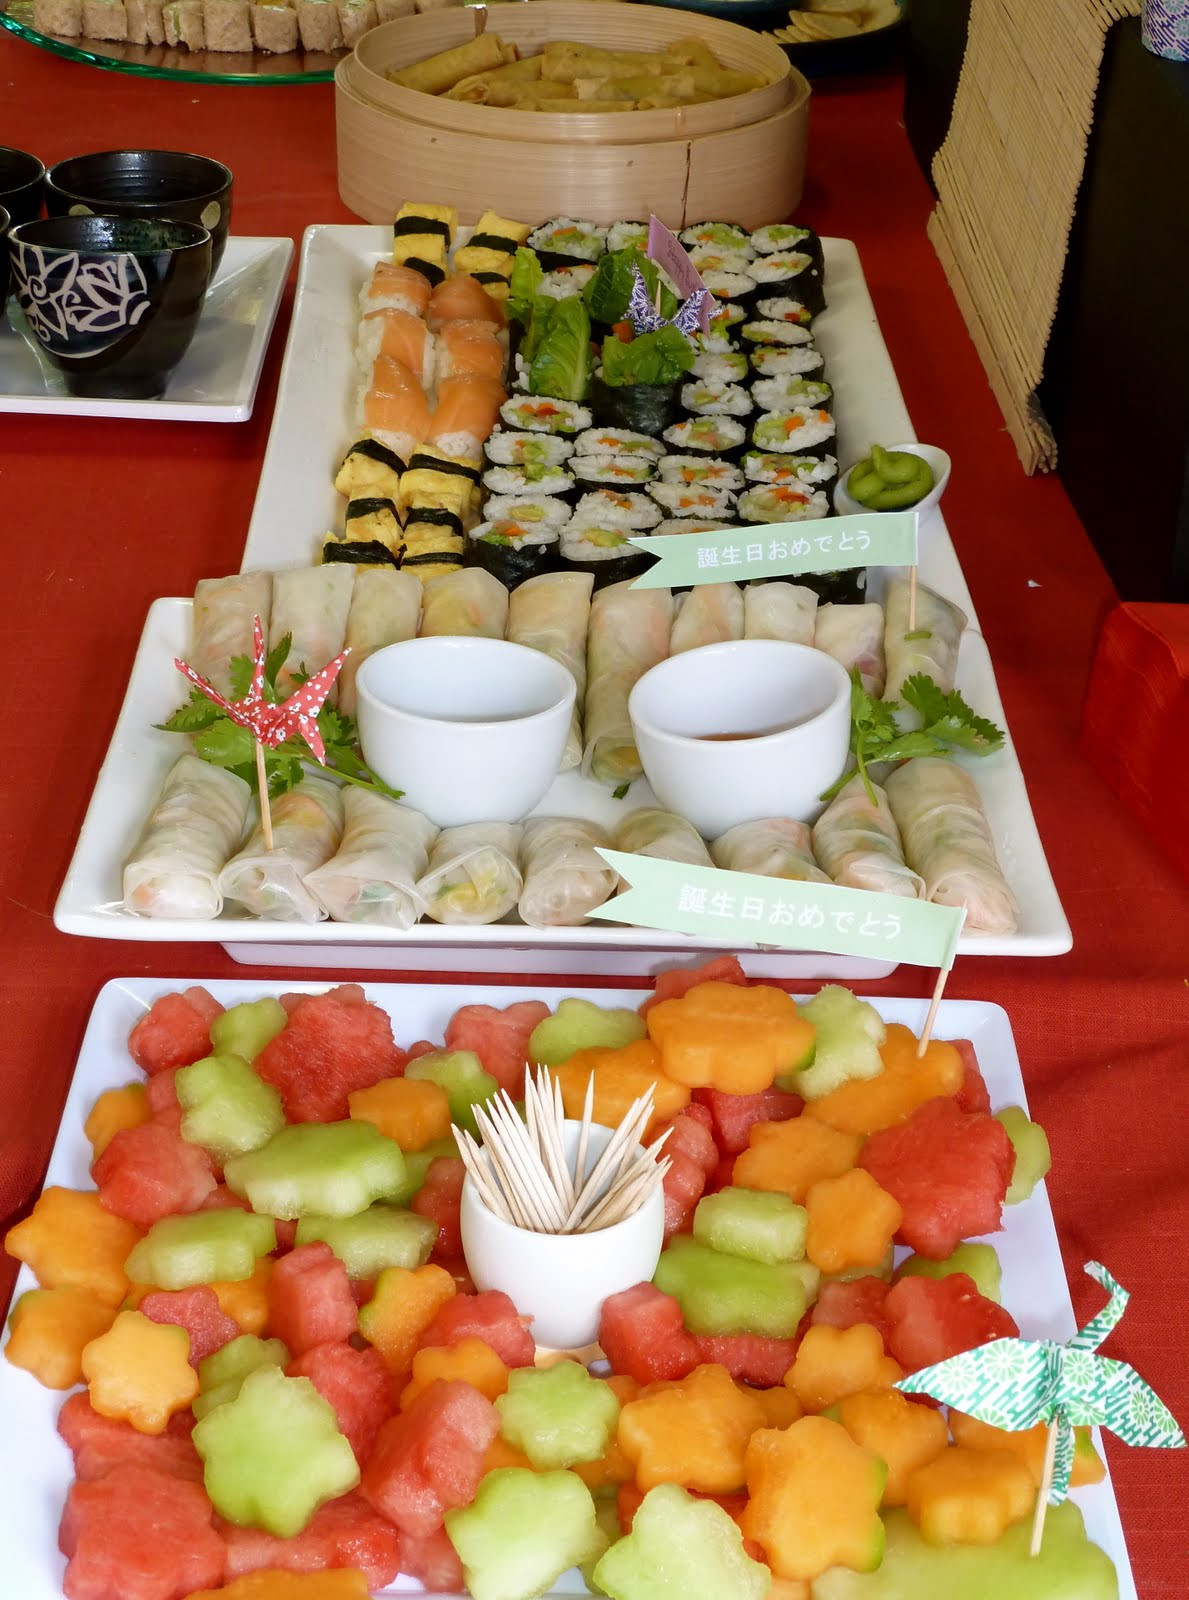 Food Themed Party Ideas
 Planning a Baby Shower Food Theme Sushi for a Japanese Theme